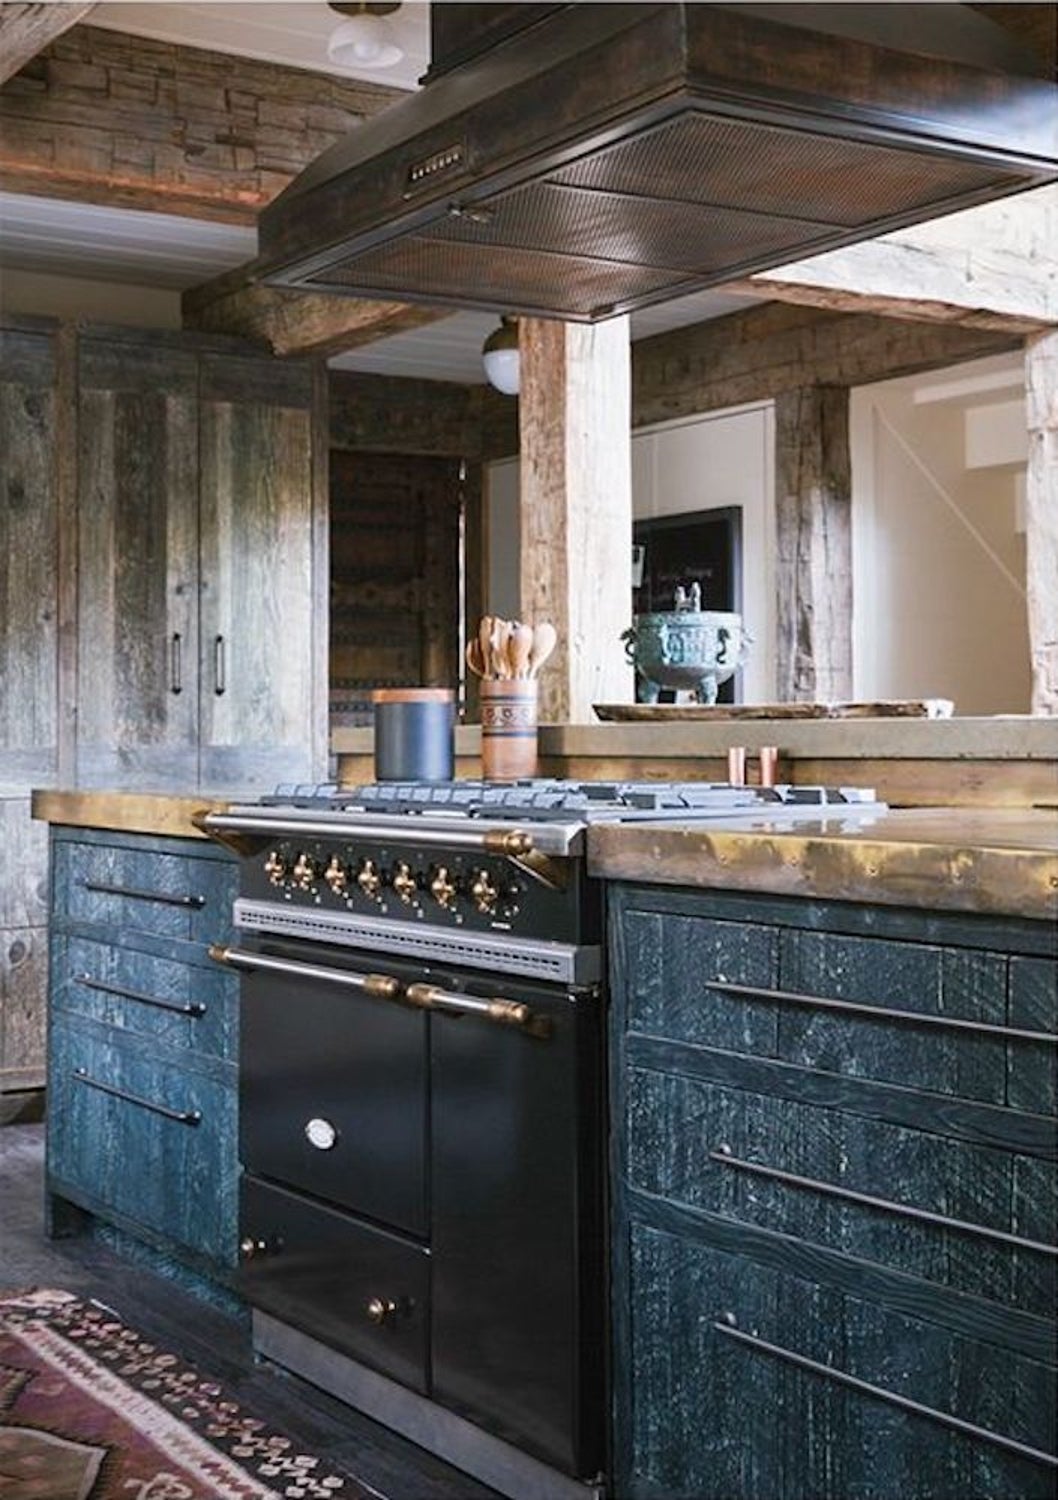 Kitchen by Hammer and Spear on 1stdibs